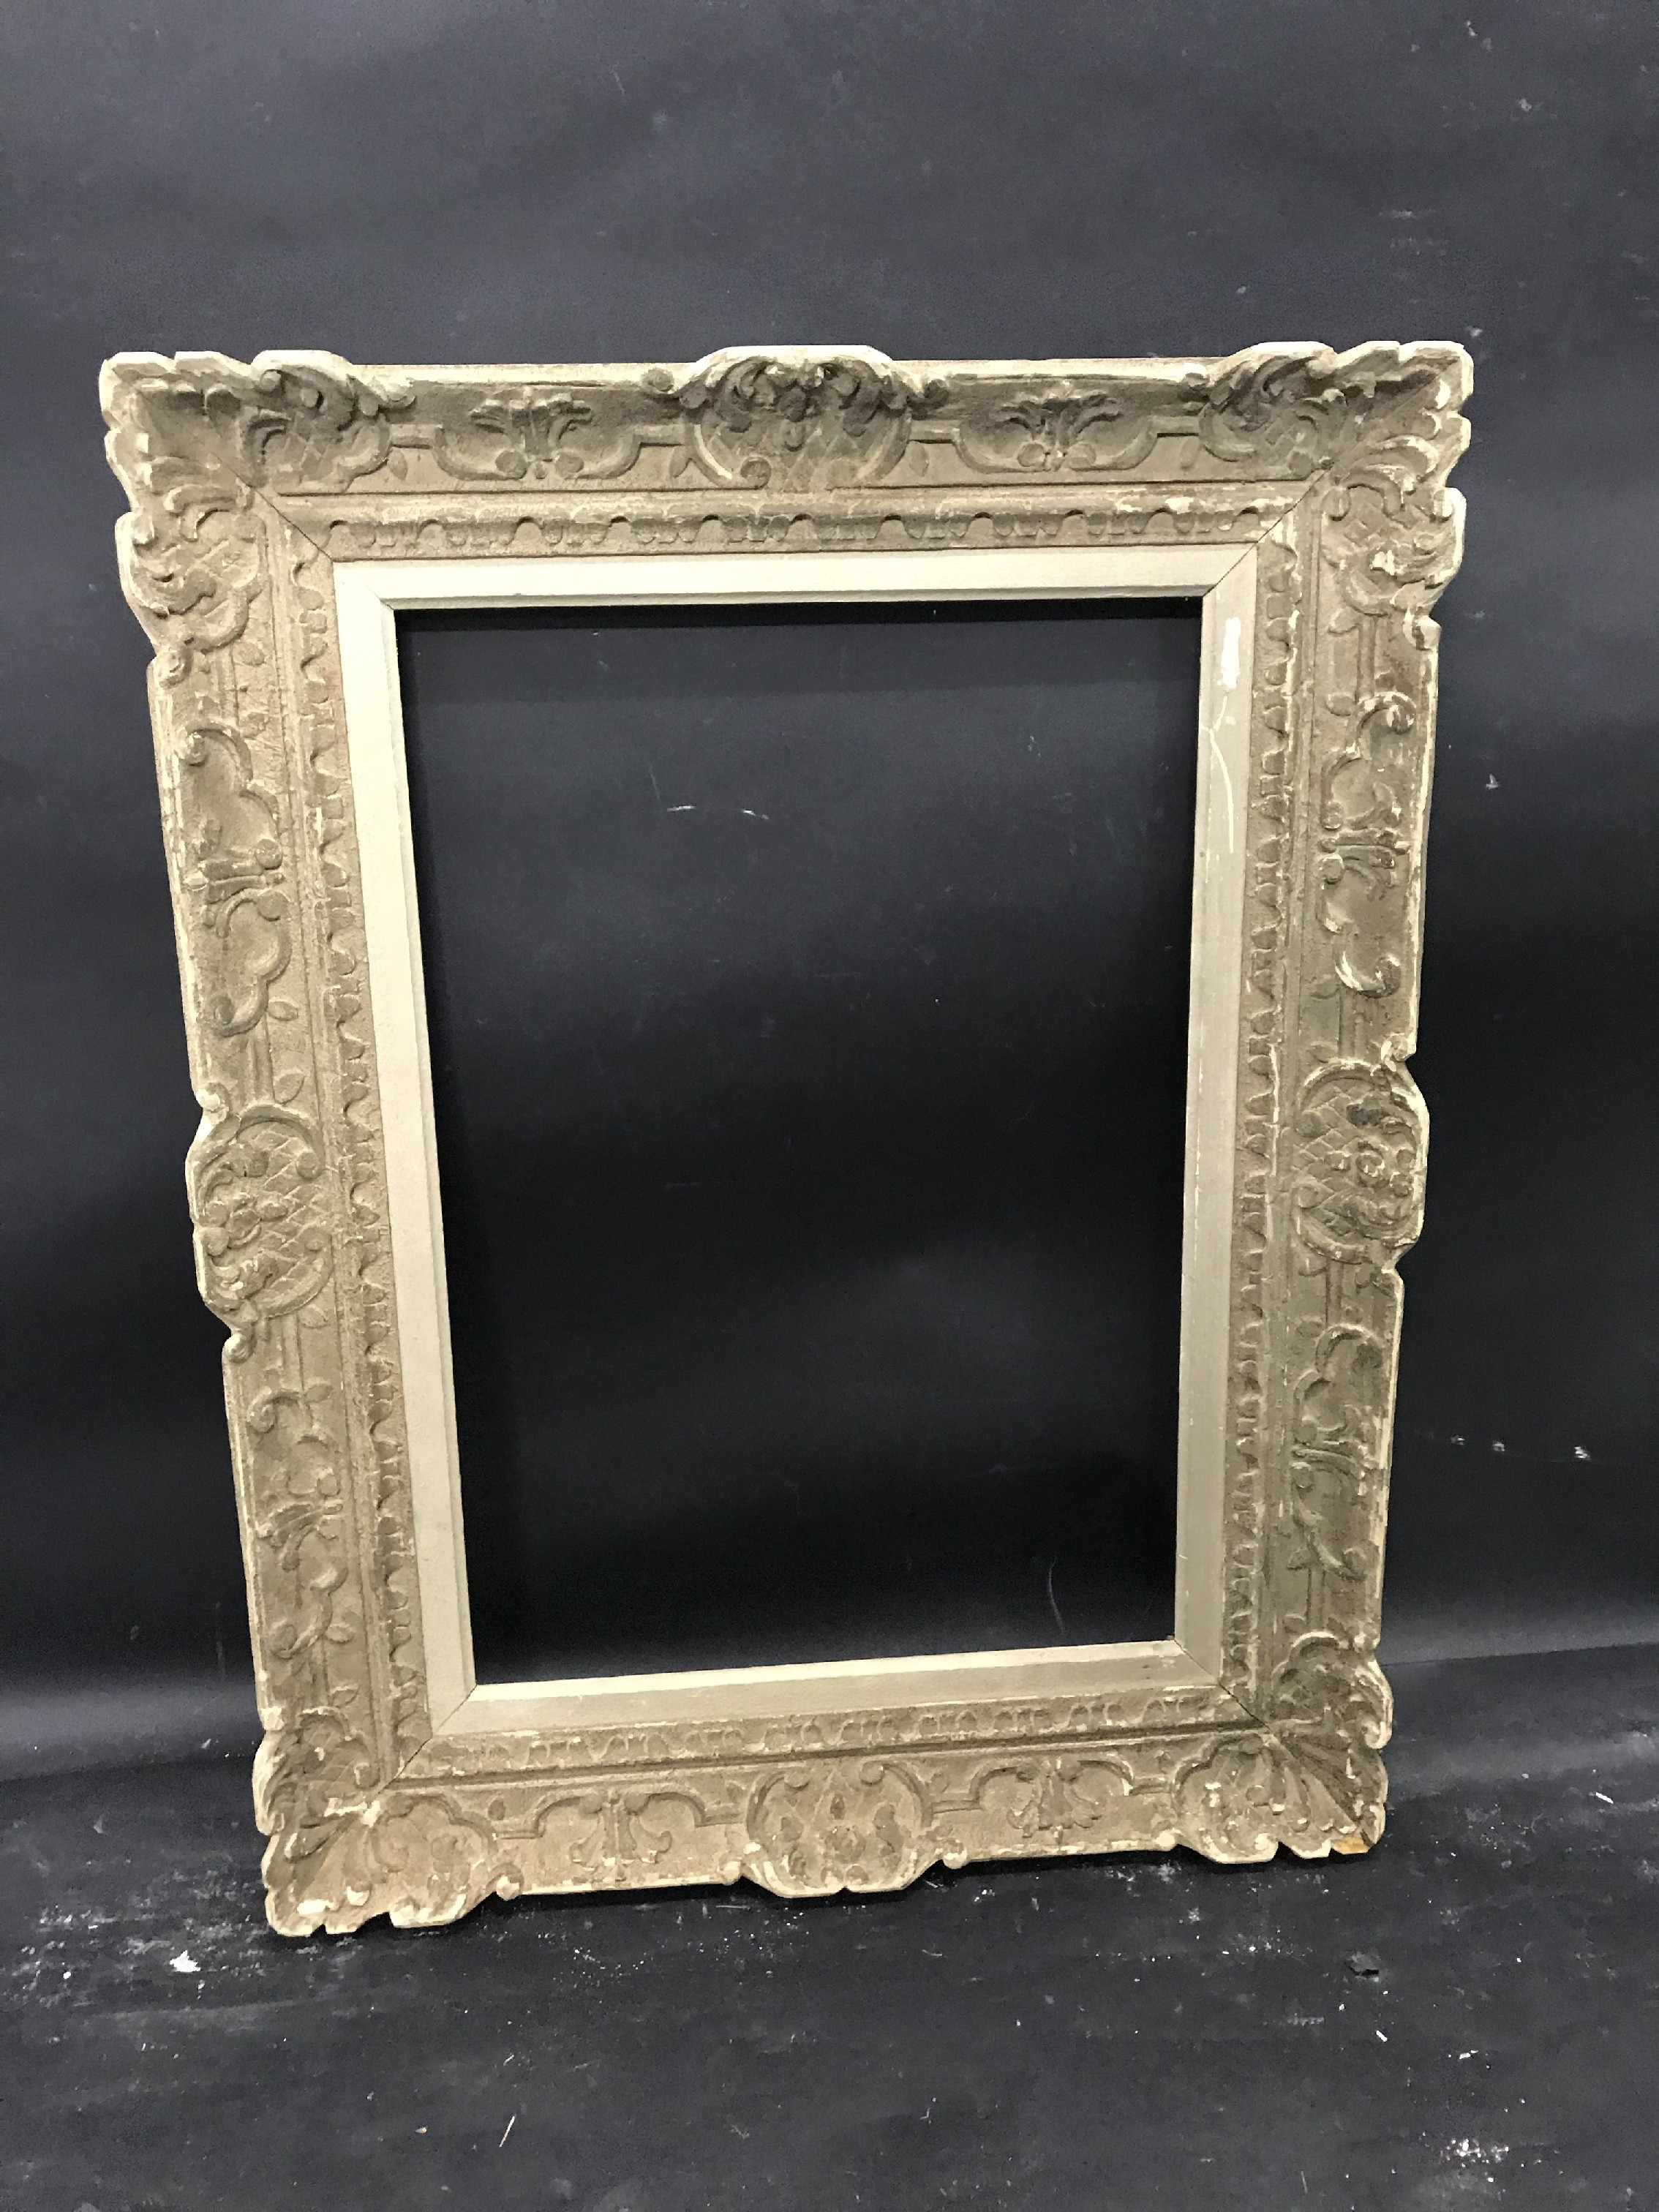 20th Century English School. A Carved Wood Painted Frame, 21.5" x 15" (rebate). - Image 2 of 3